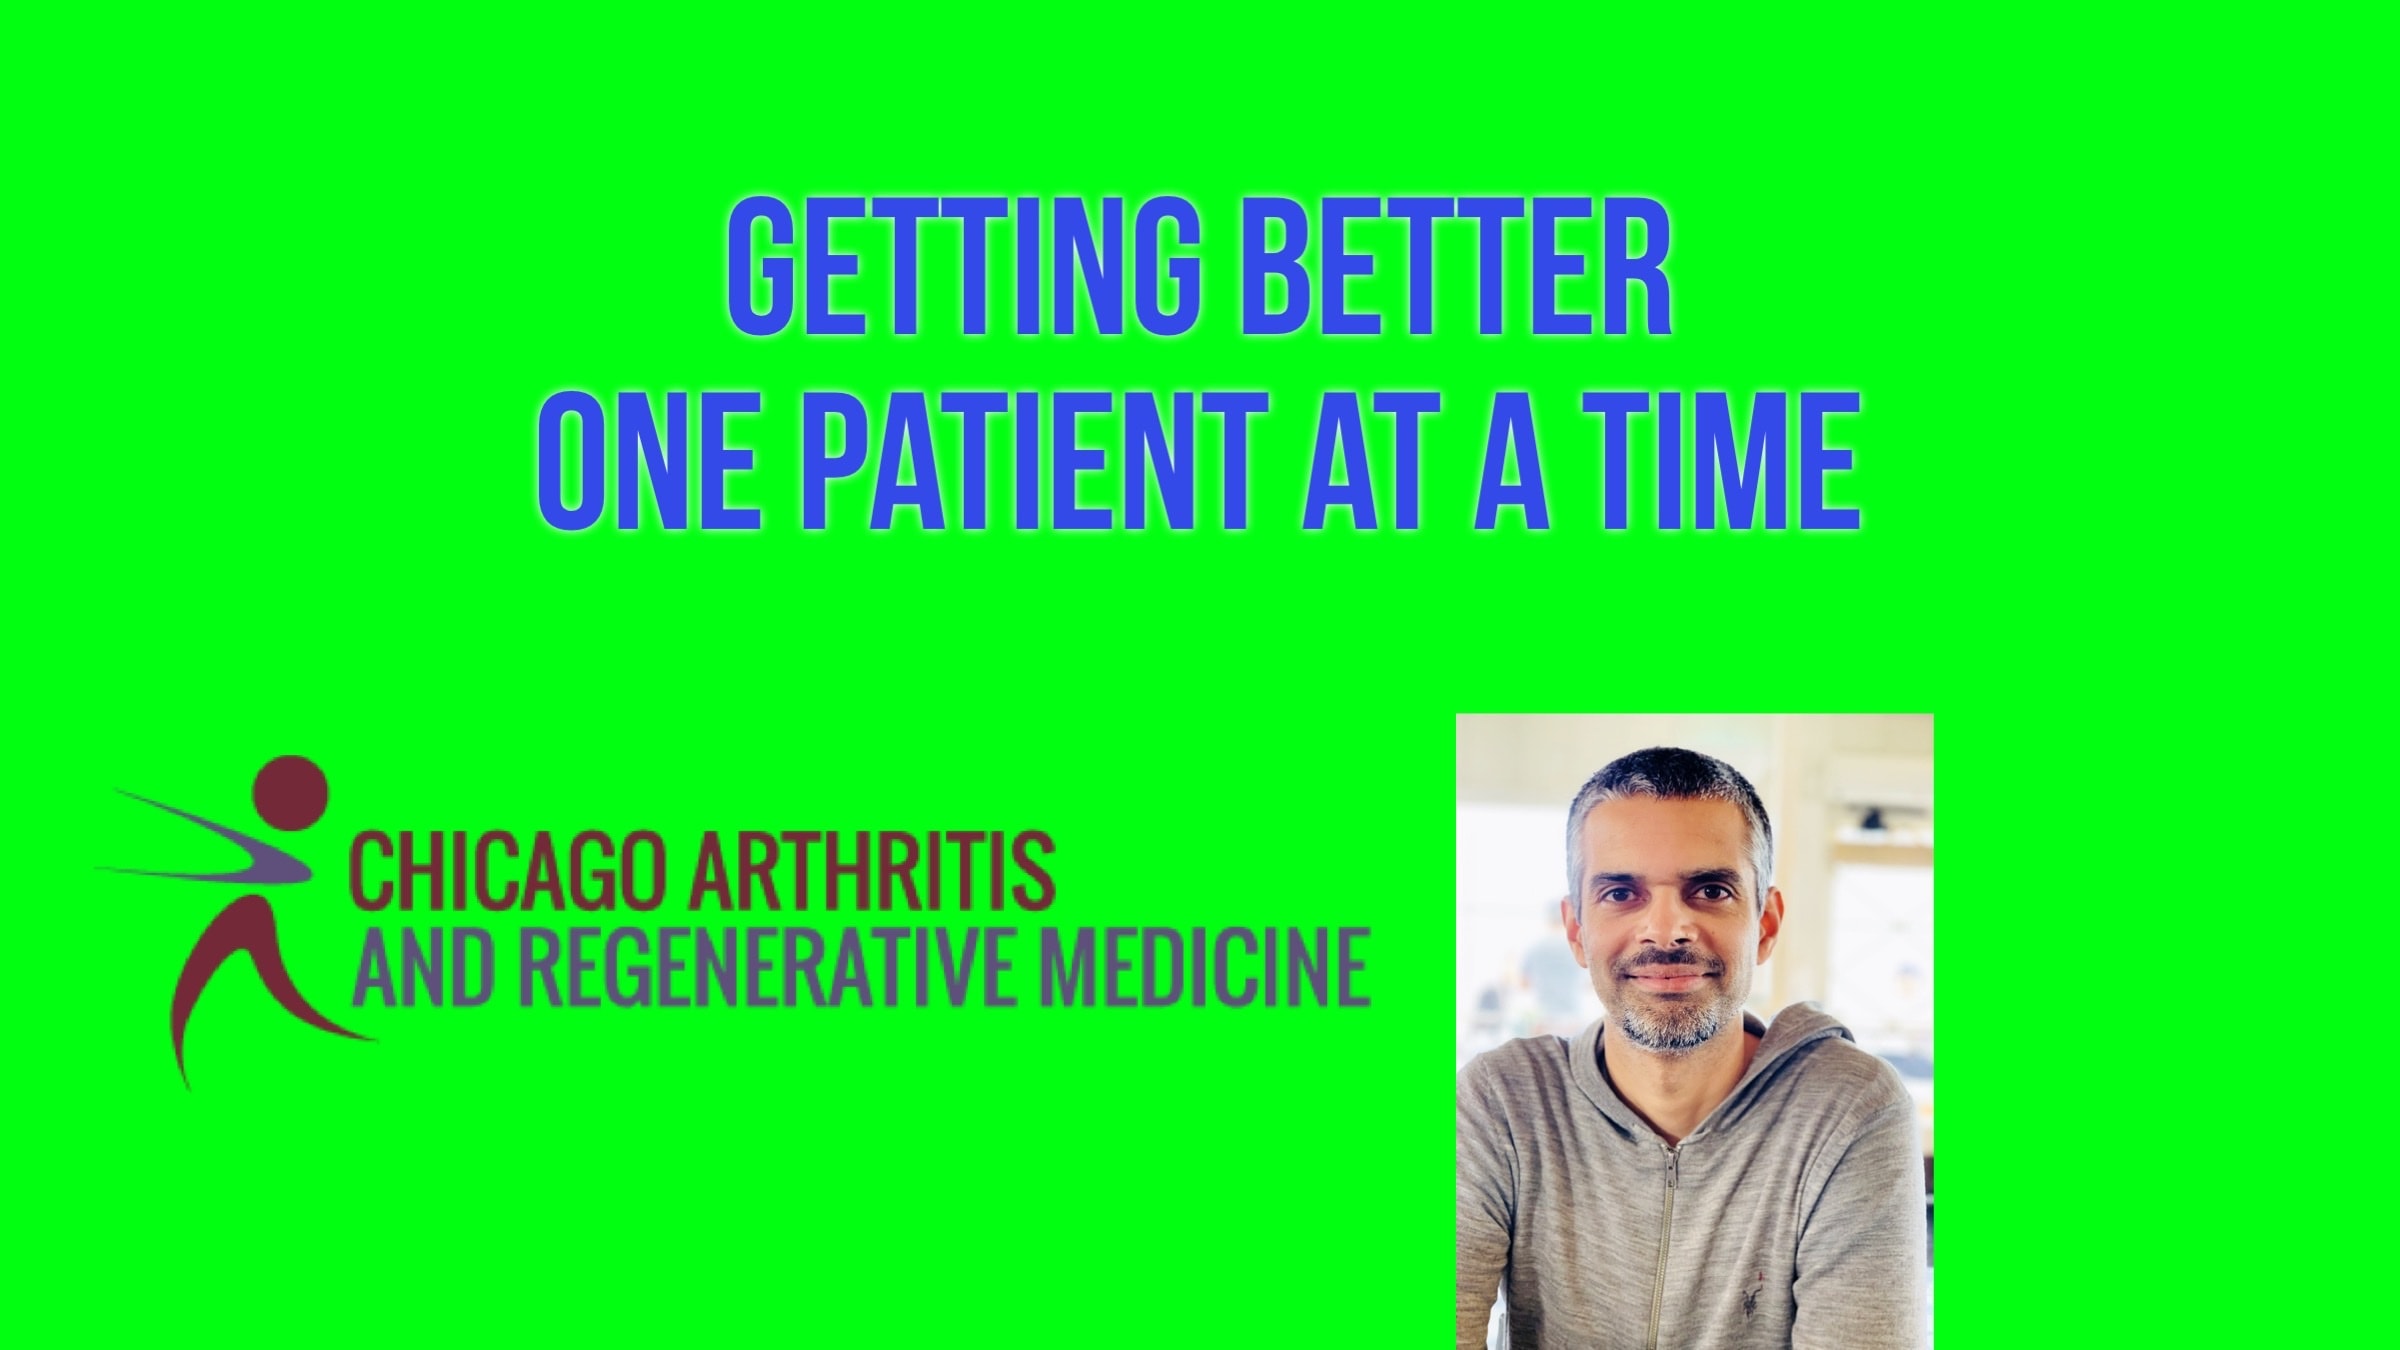 Getting Better One Patient at a Time